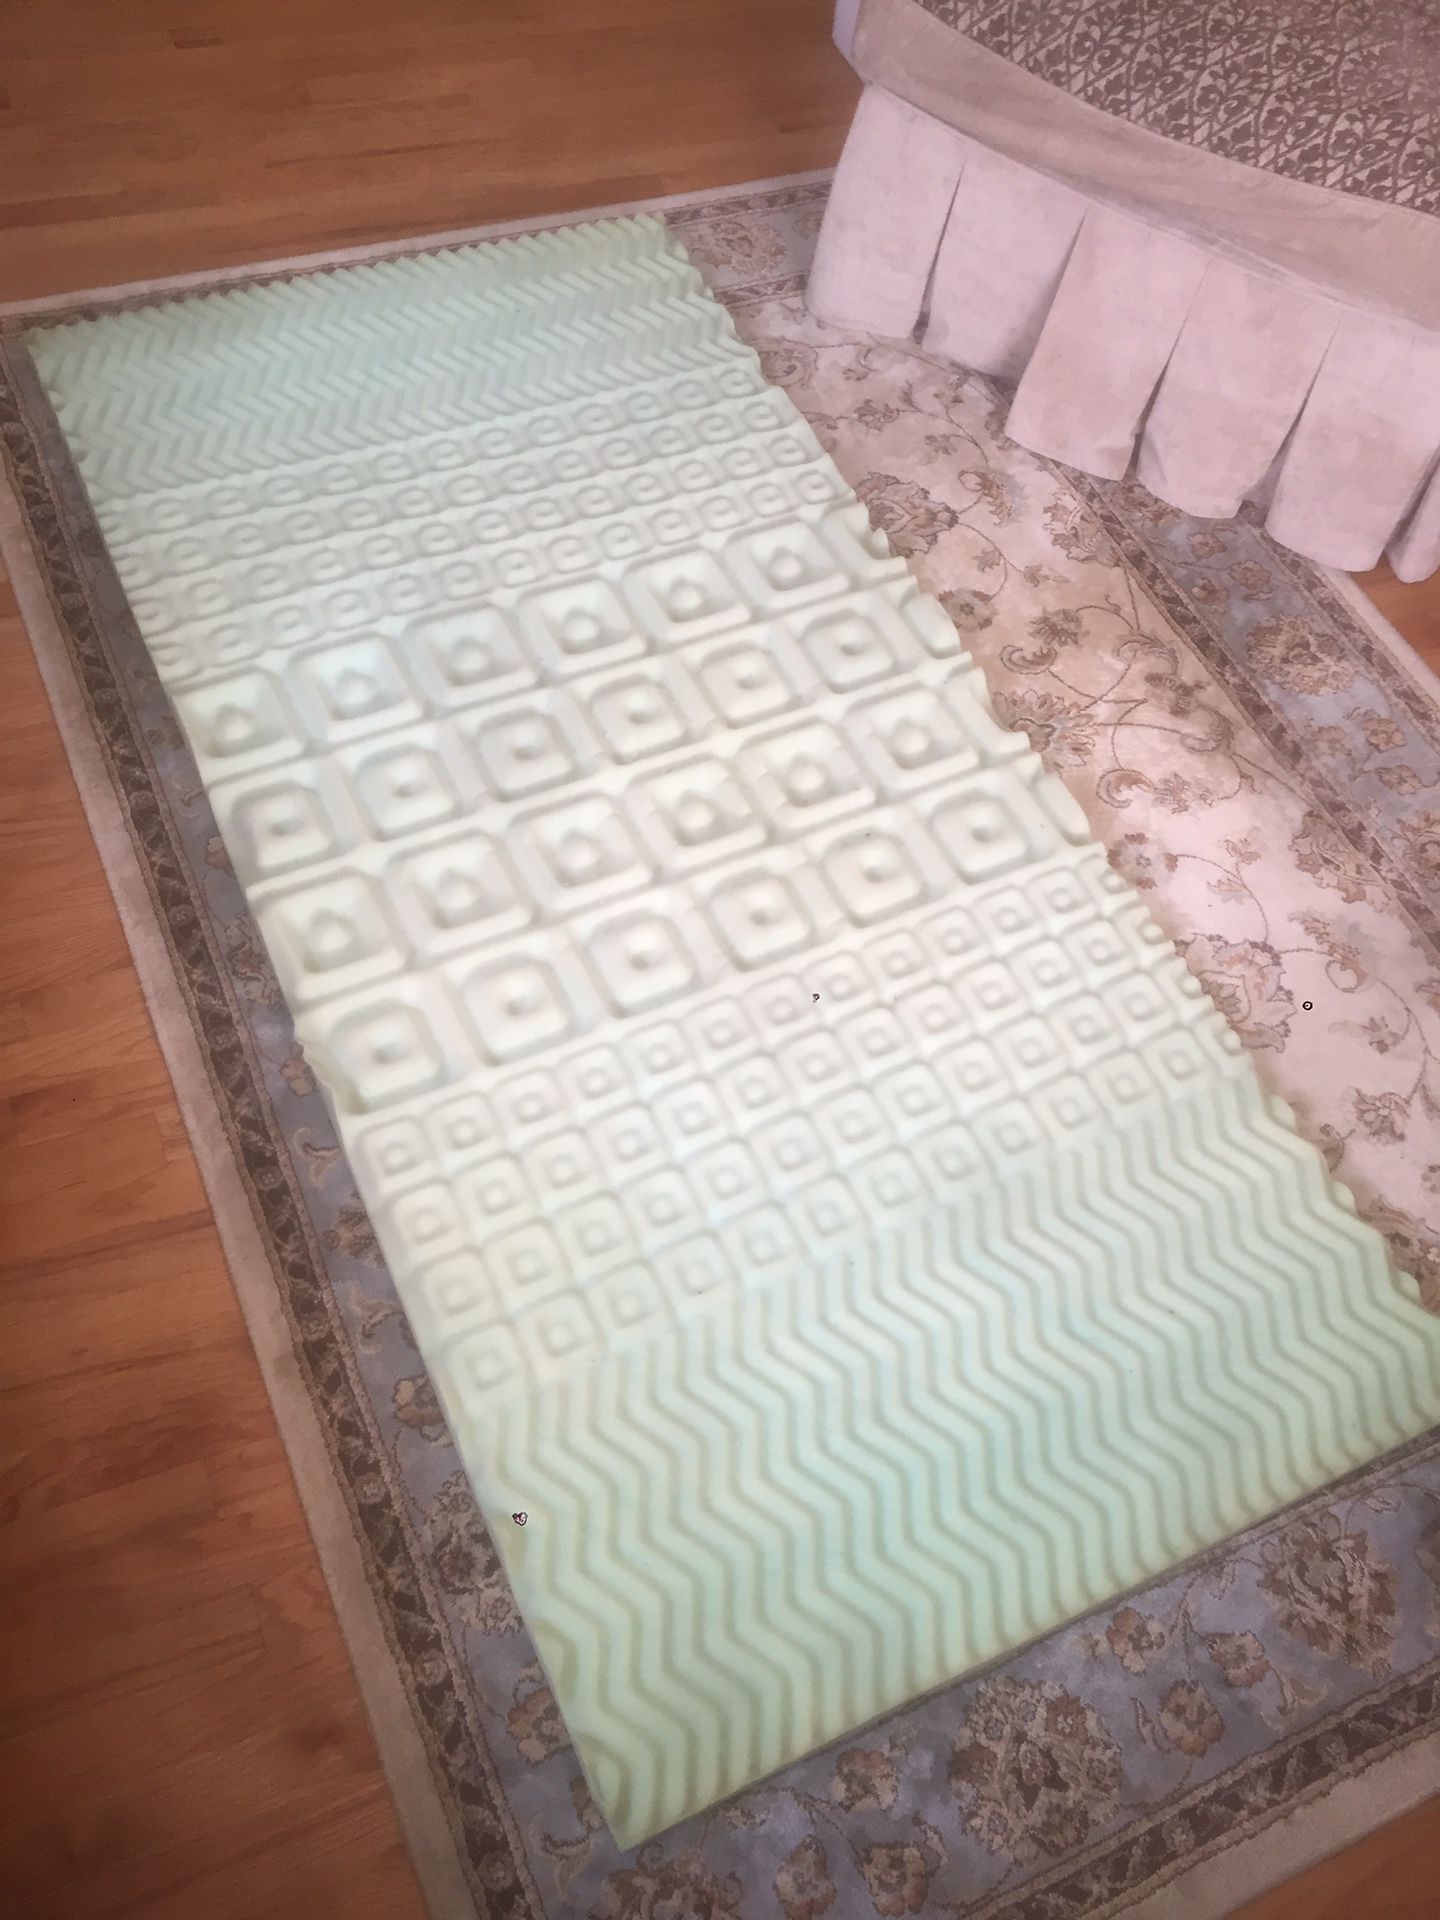 Twin bed foam cover